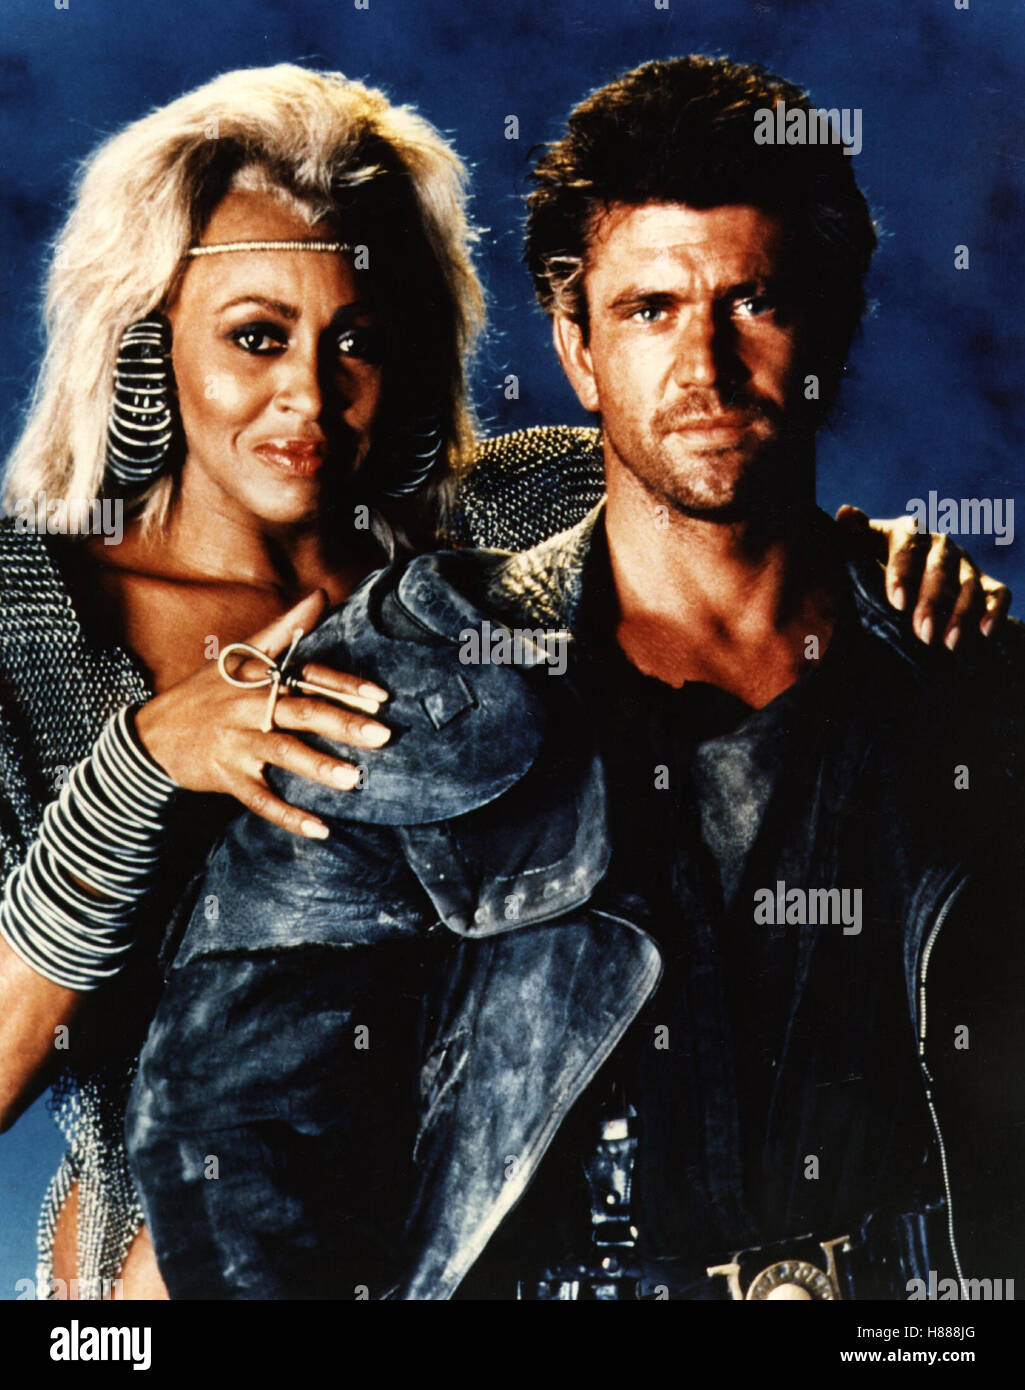 Mad Max - Jenseits der Donnerkuppel, (MAD MAX BEYOND THE THUNDERDOME) AUS  1985, George Miller, TINA TURNER + MEL GIBSON Stock Photo - Alamy